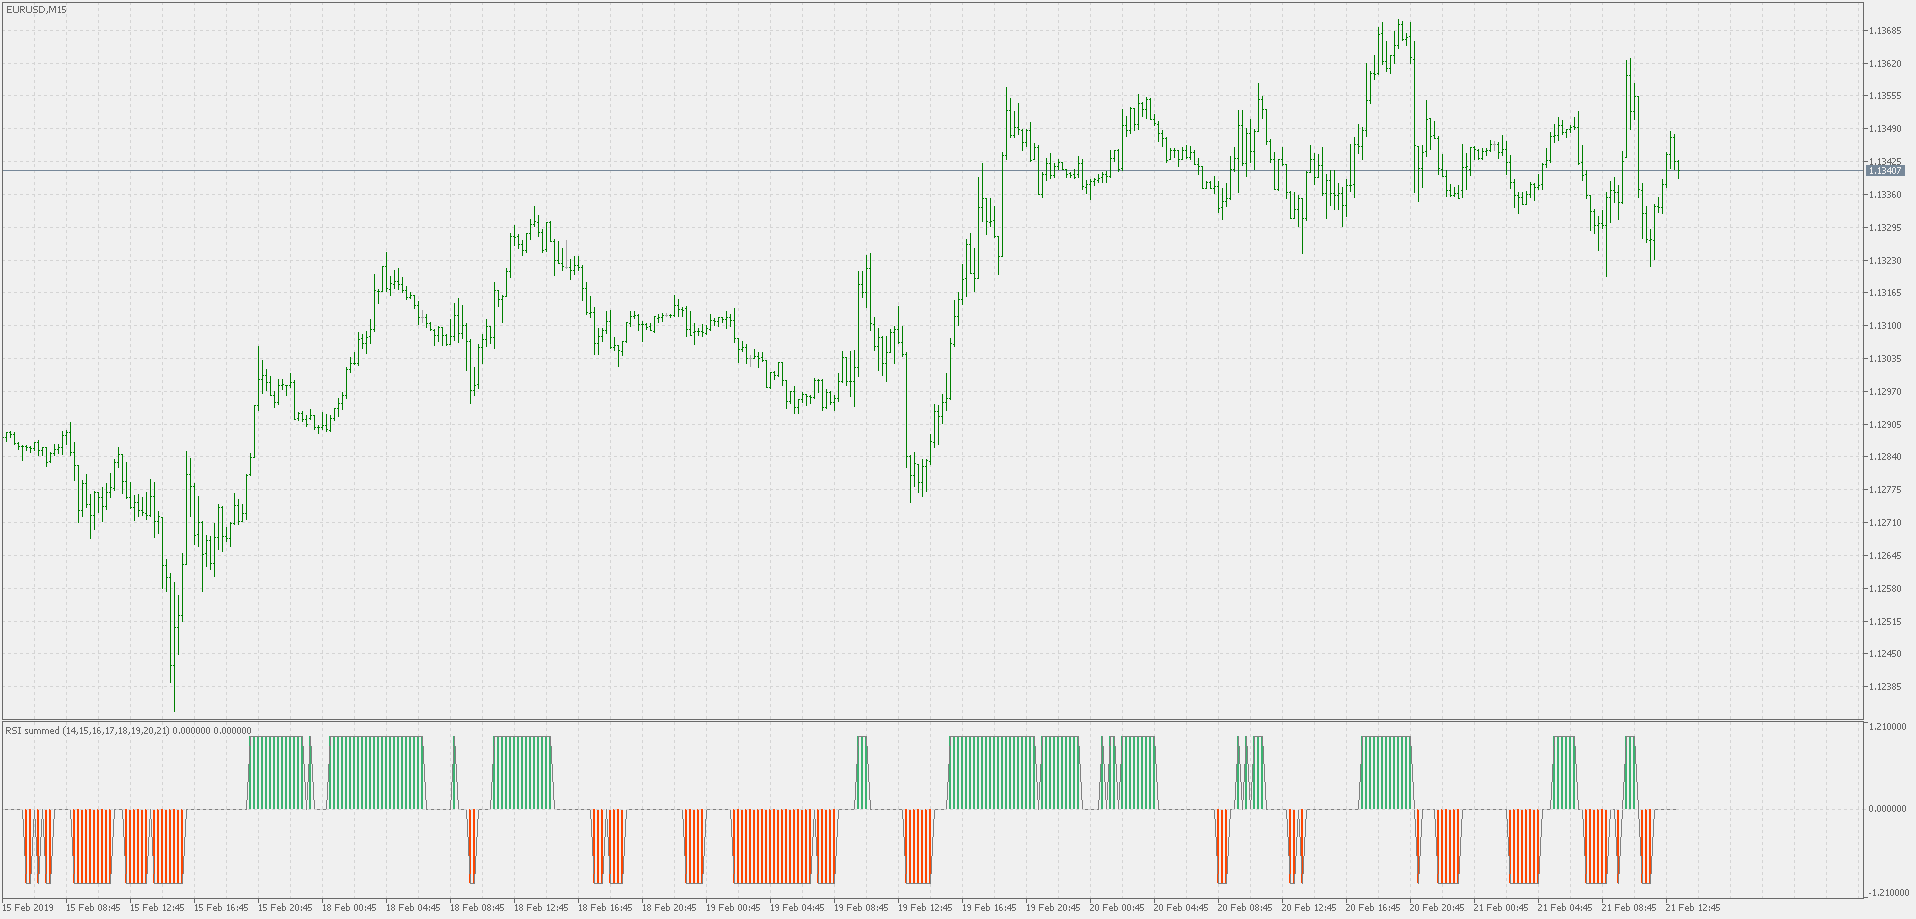 Free download of the 'RSI Summed' indicator by 'mladen ...